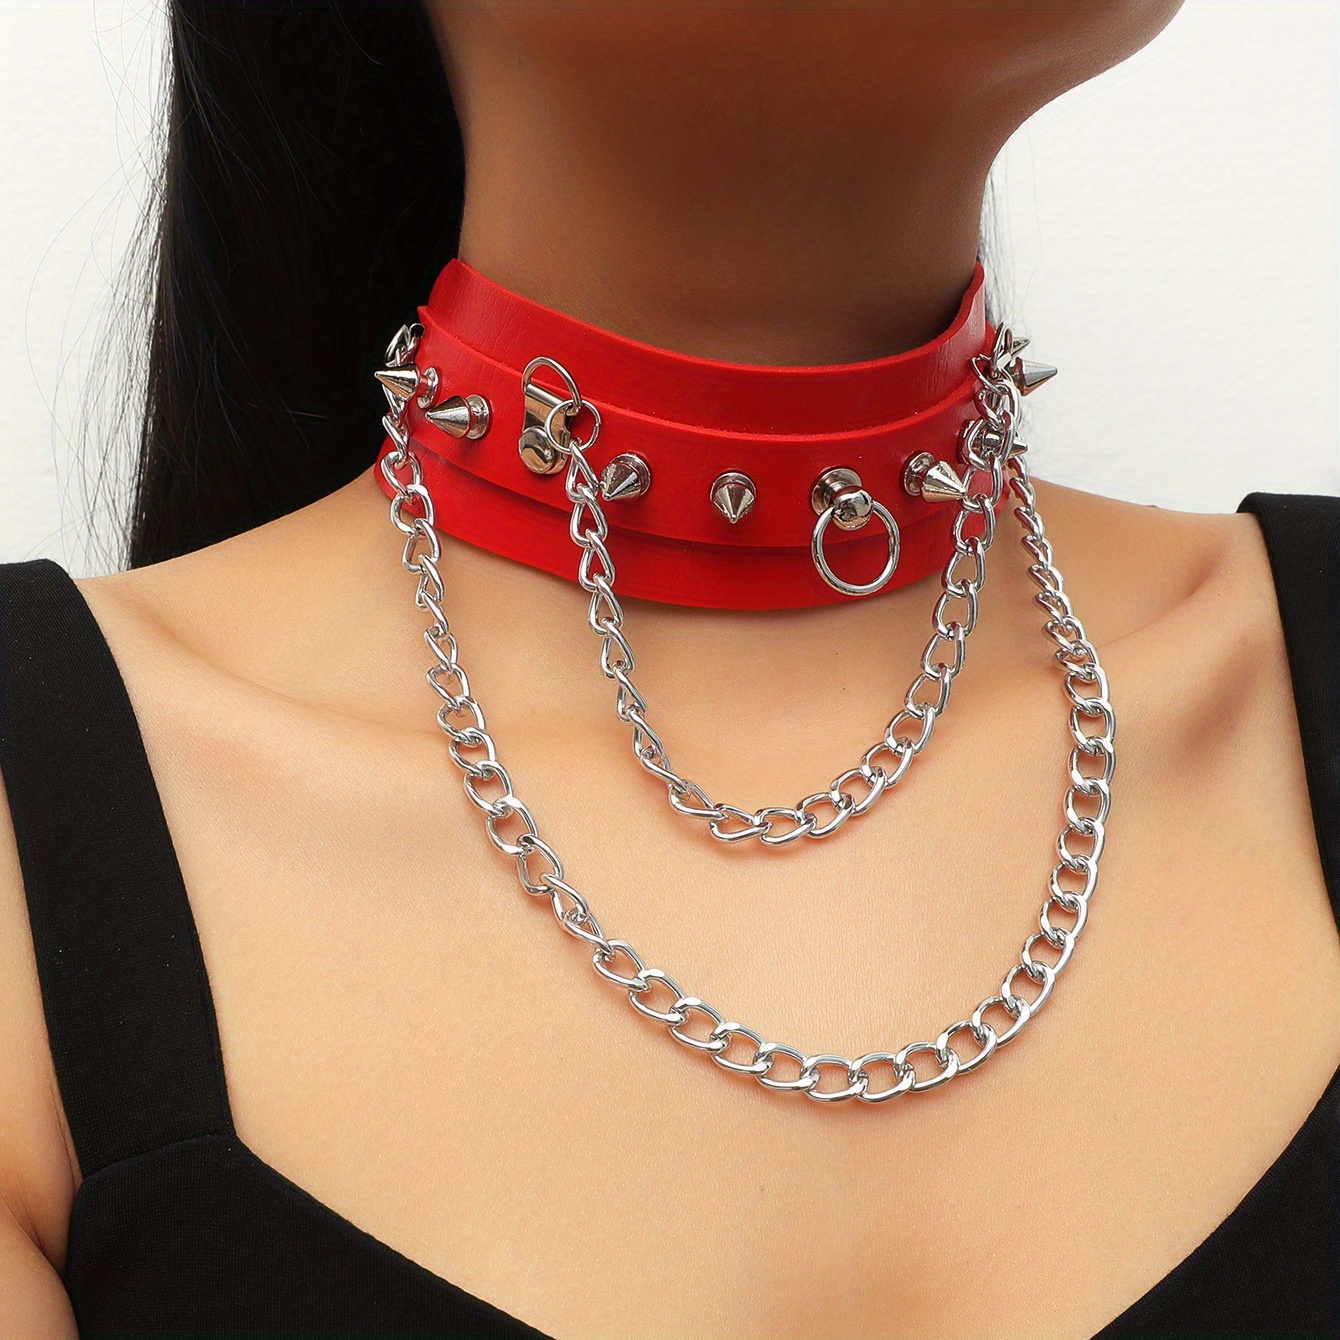 Punk Metal Rings Rivet Hollow Leather Necklace Bar Party Accessories Gothic  Rock Adjustable Circle Collars Choker, Fashion Choker